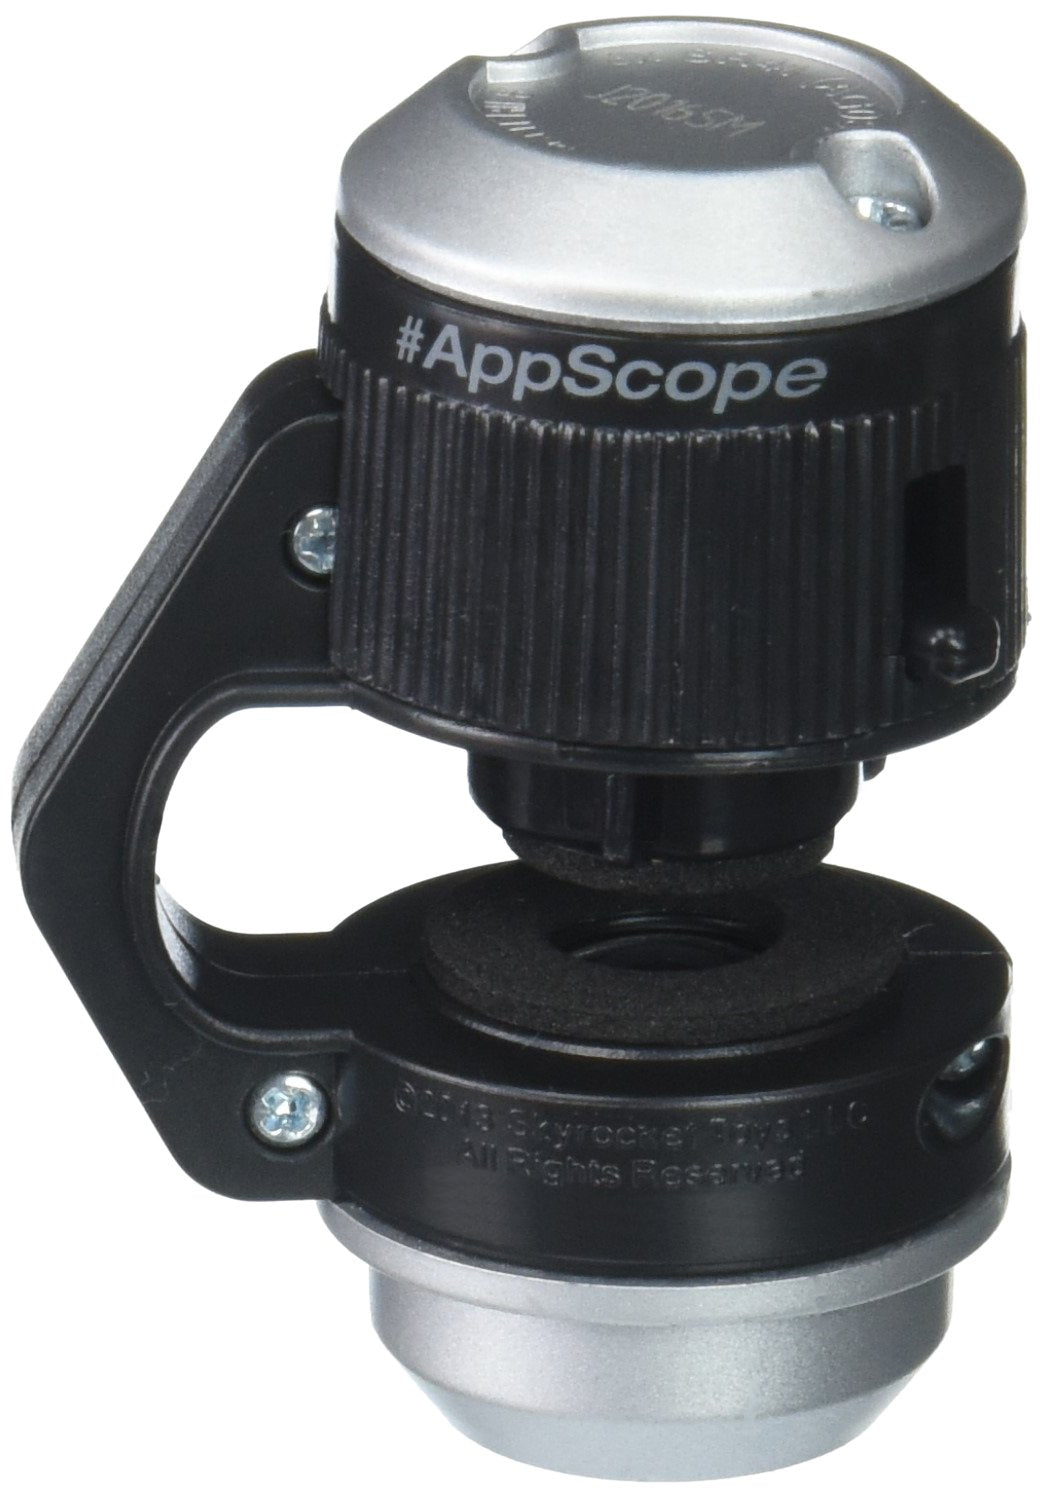 AppScope Quick Attach Microscope, 1 pack, Colors May Vary